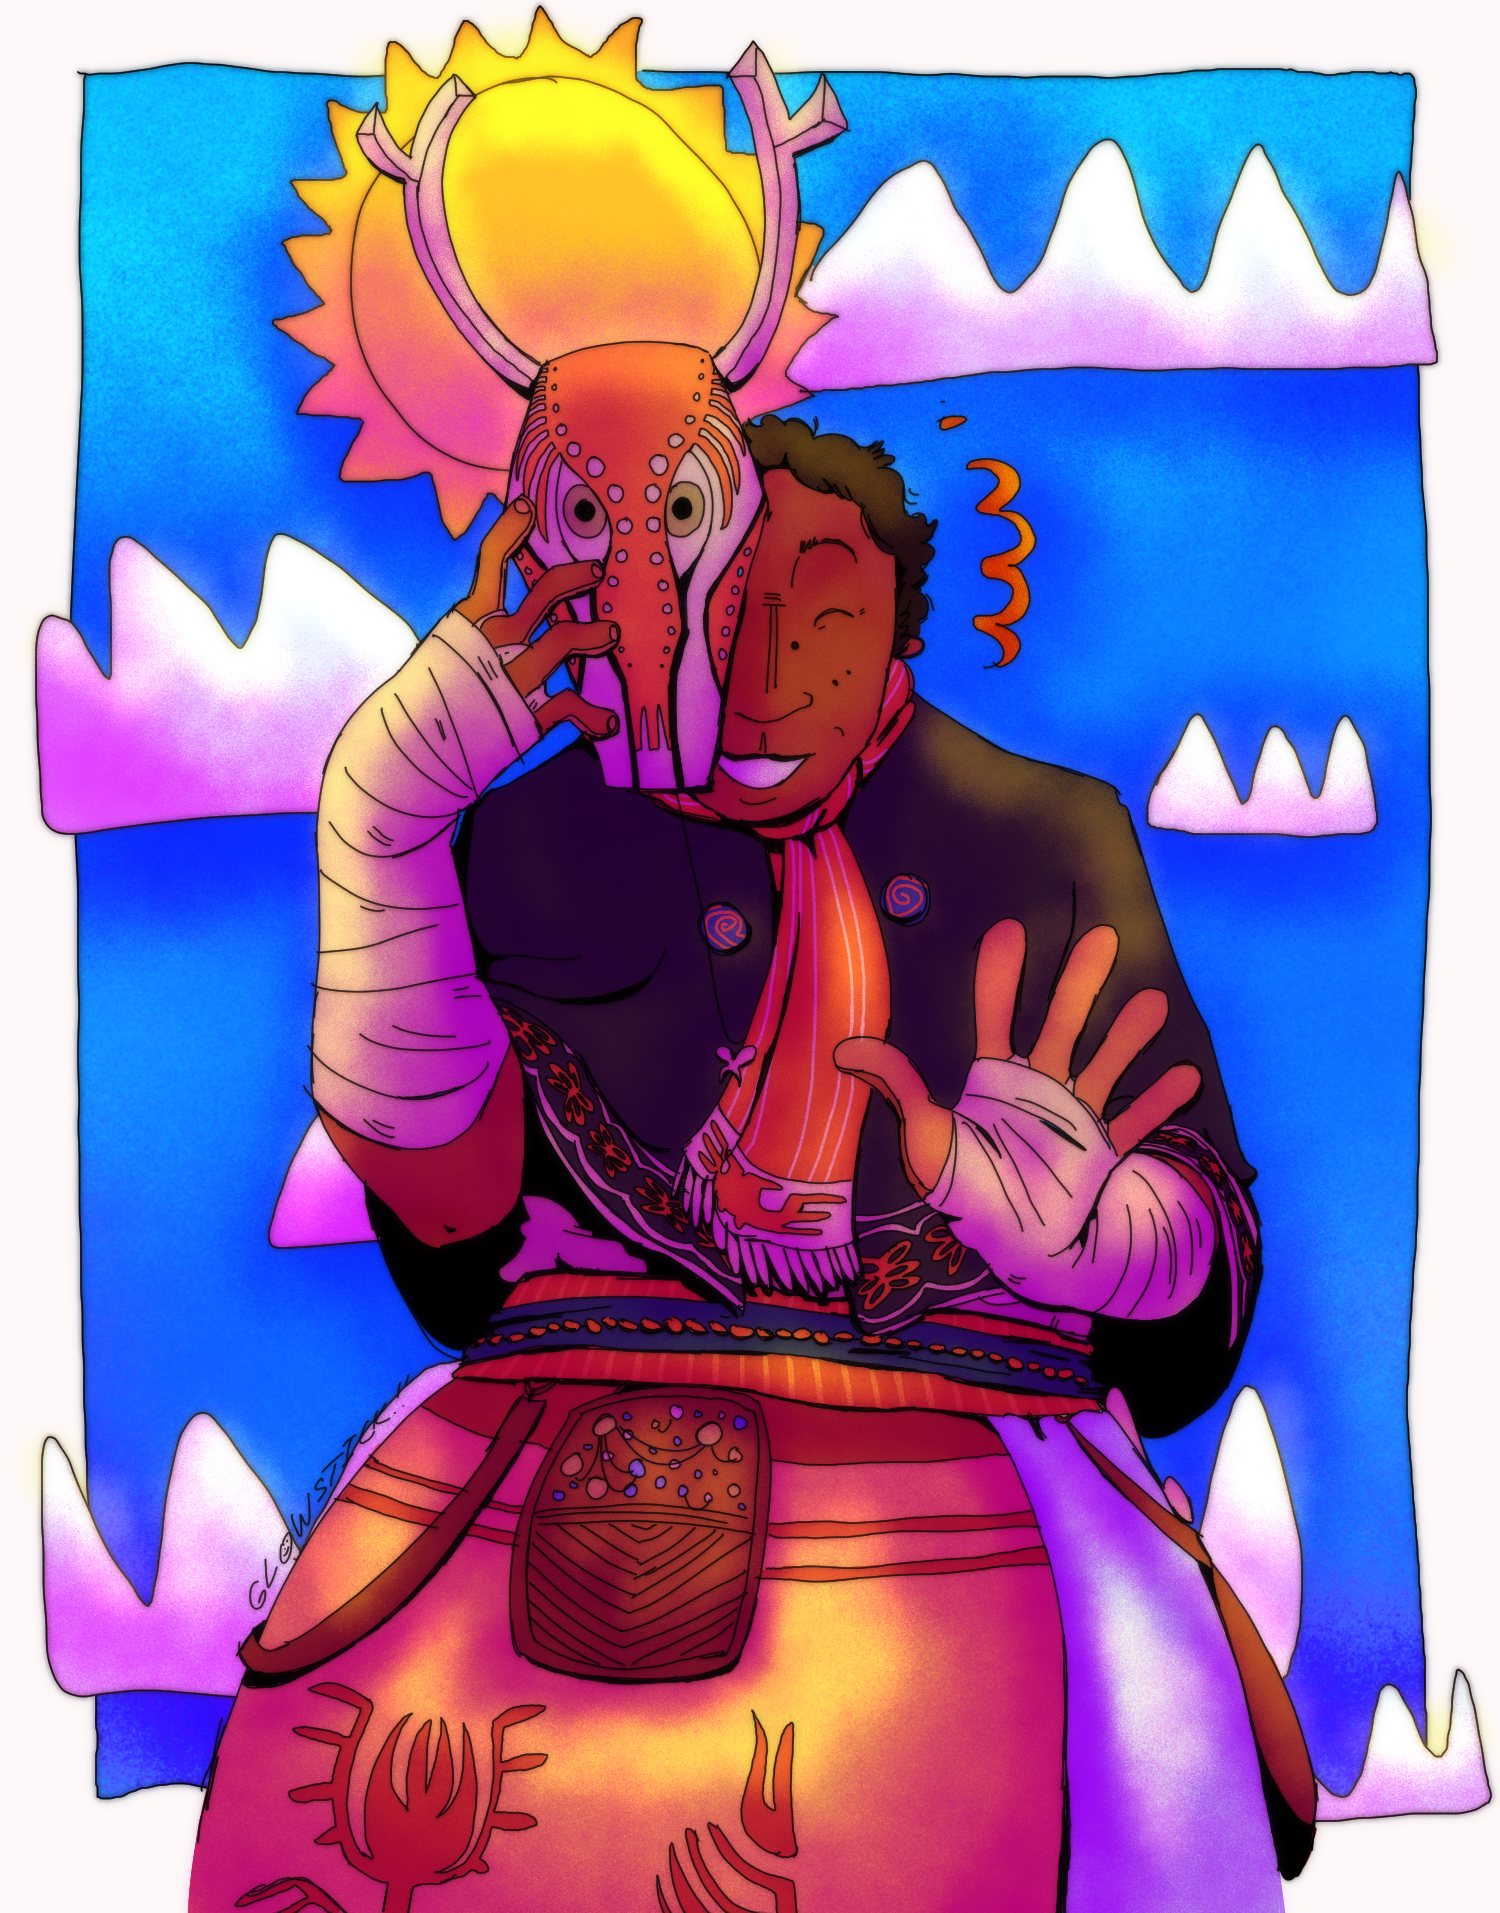 A brightly colored drawing of a brown skinned indigenous person. They are dresssed in several layers of patterned fabrics, mainly a capelet, sash, and skirt, and their forearms are bandaged. Their hair is brown and buzzed short, and they are holding up a red, oryx-like mask and smiling. The background consists of a cartoony sun and blue sky.